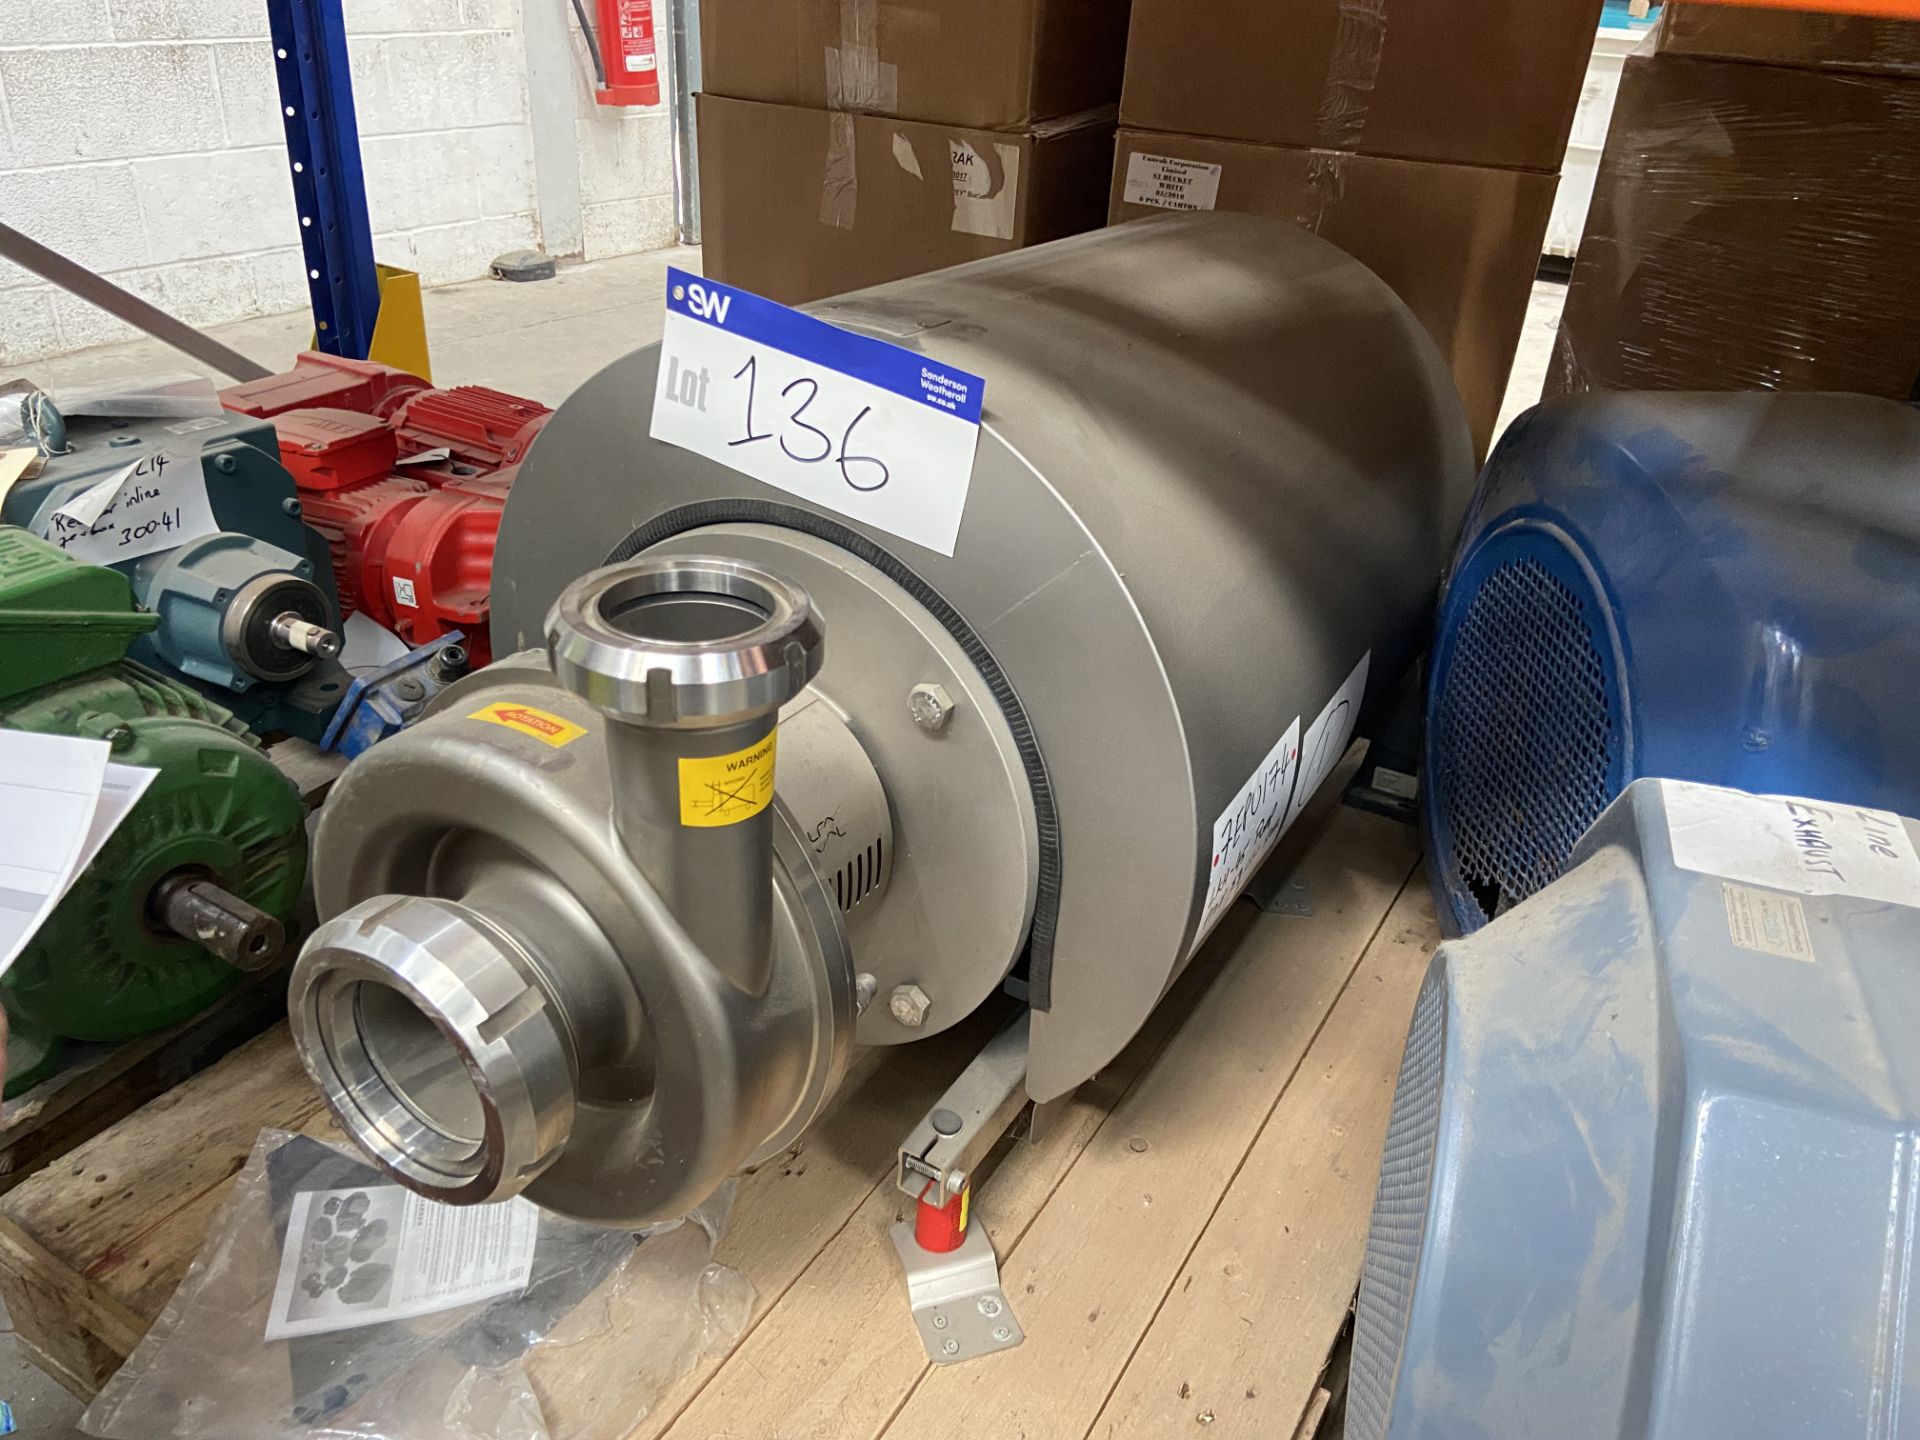 Alfa Laval LKH45 Stainless Steel Cased Pump, lot located in Bretherton, Lancashire, lot loaded - Image 2 of 4